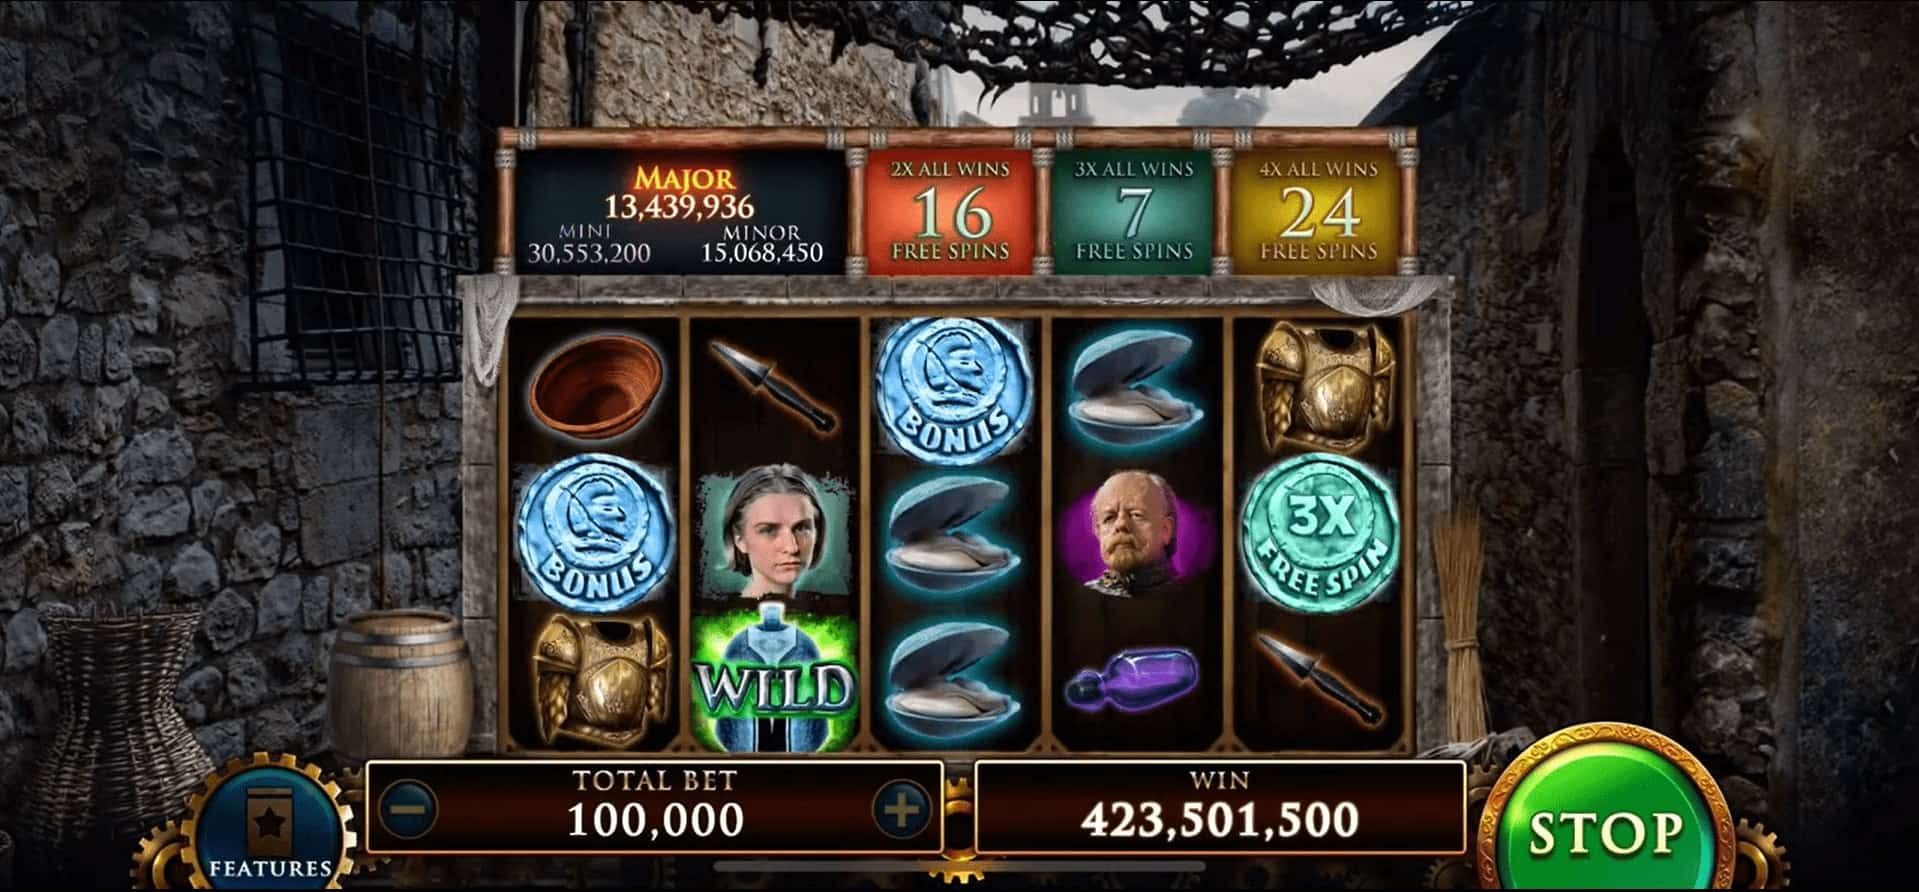 Game of Thrones Slots Casino free coins proof